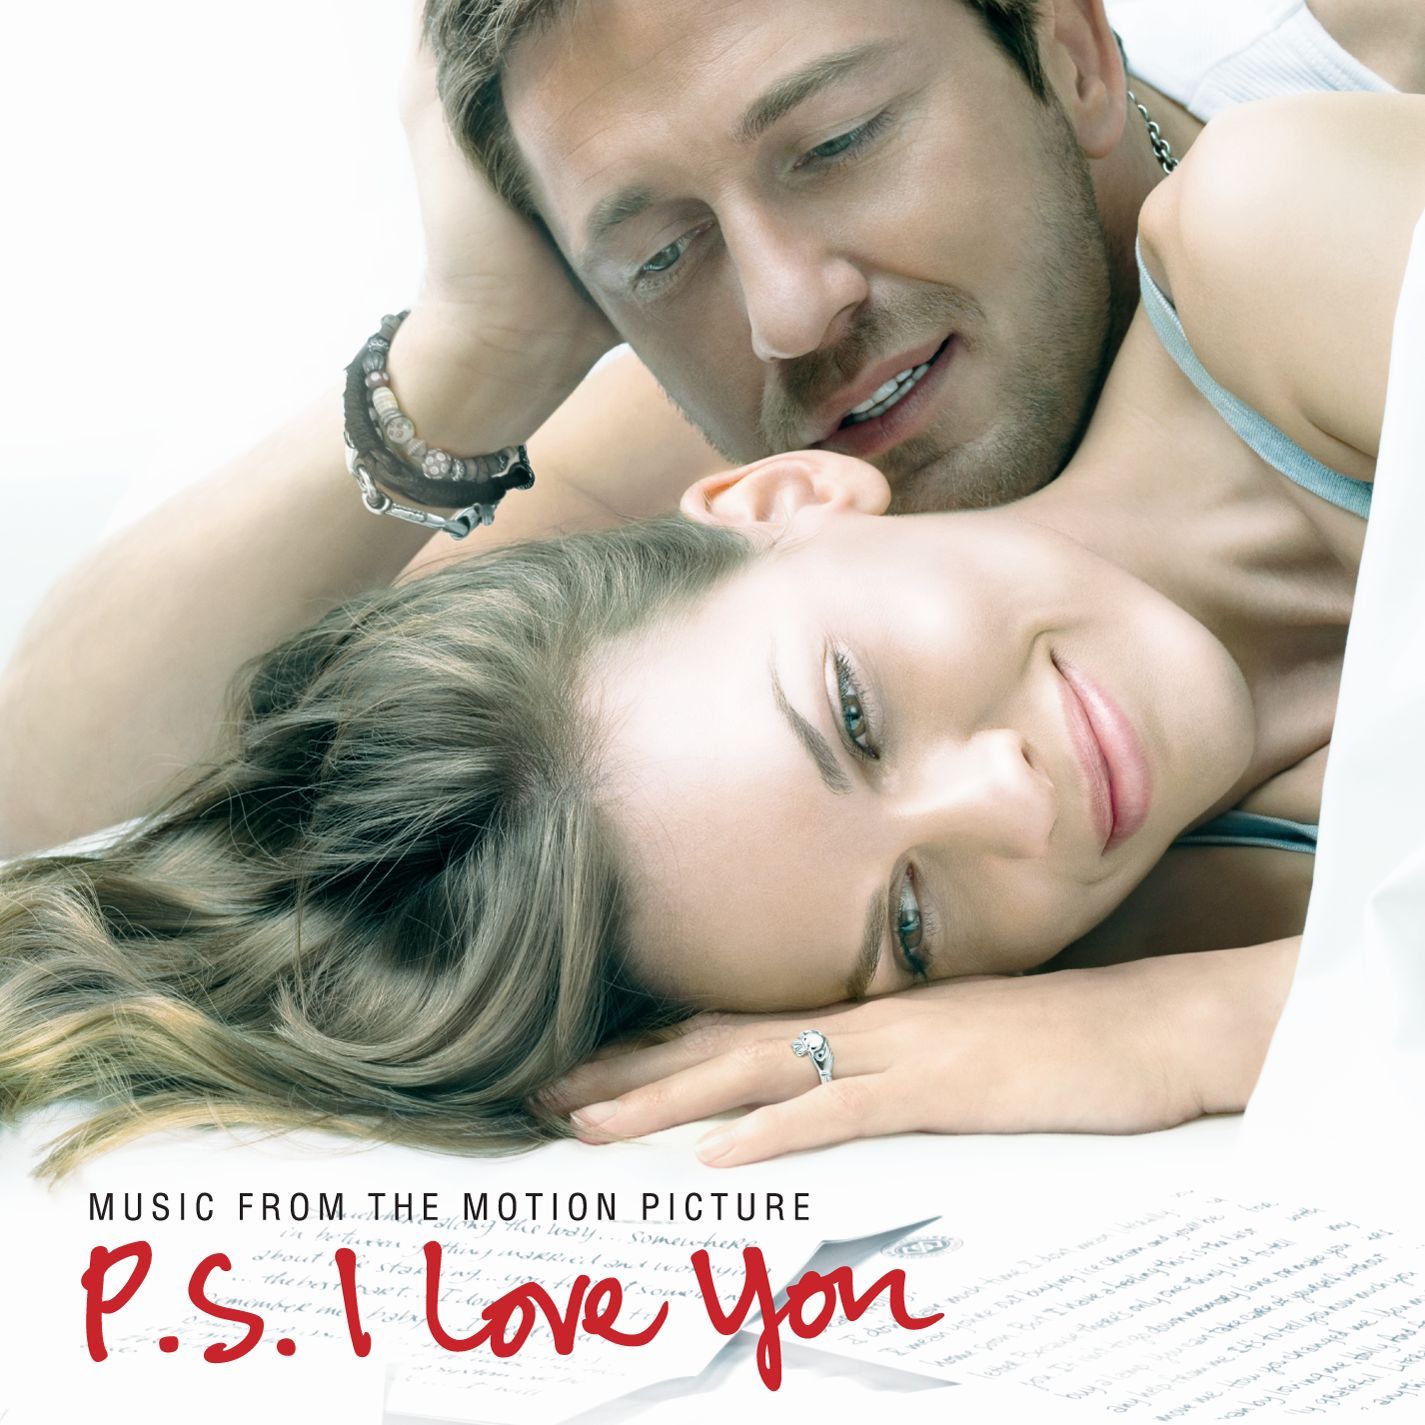 P.S. I Love You by John Powell ost 2008